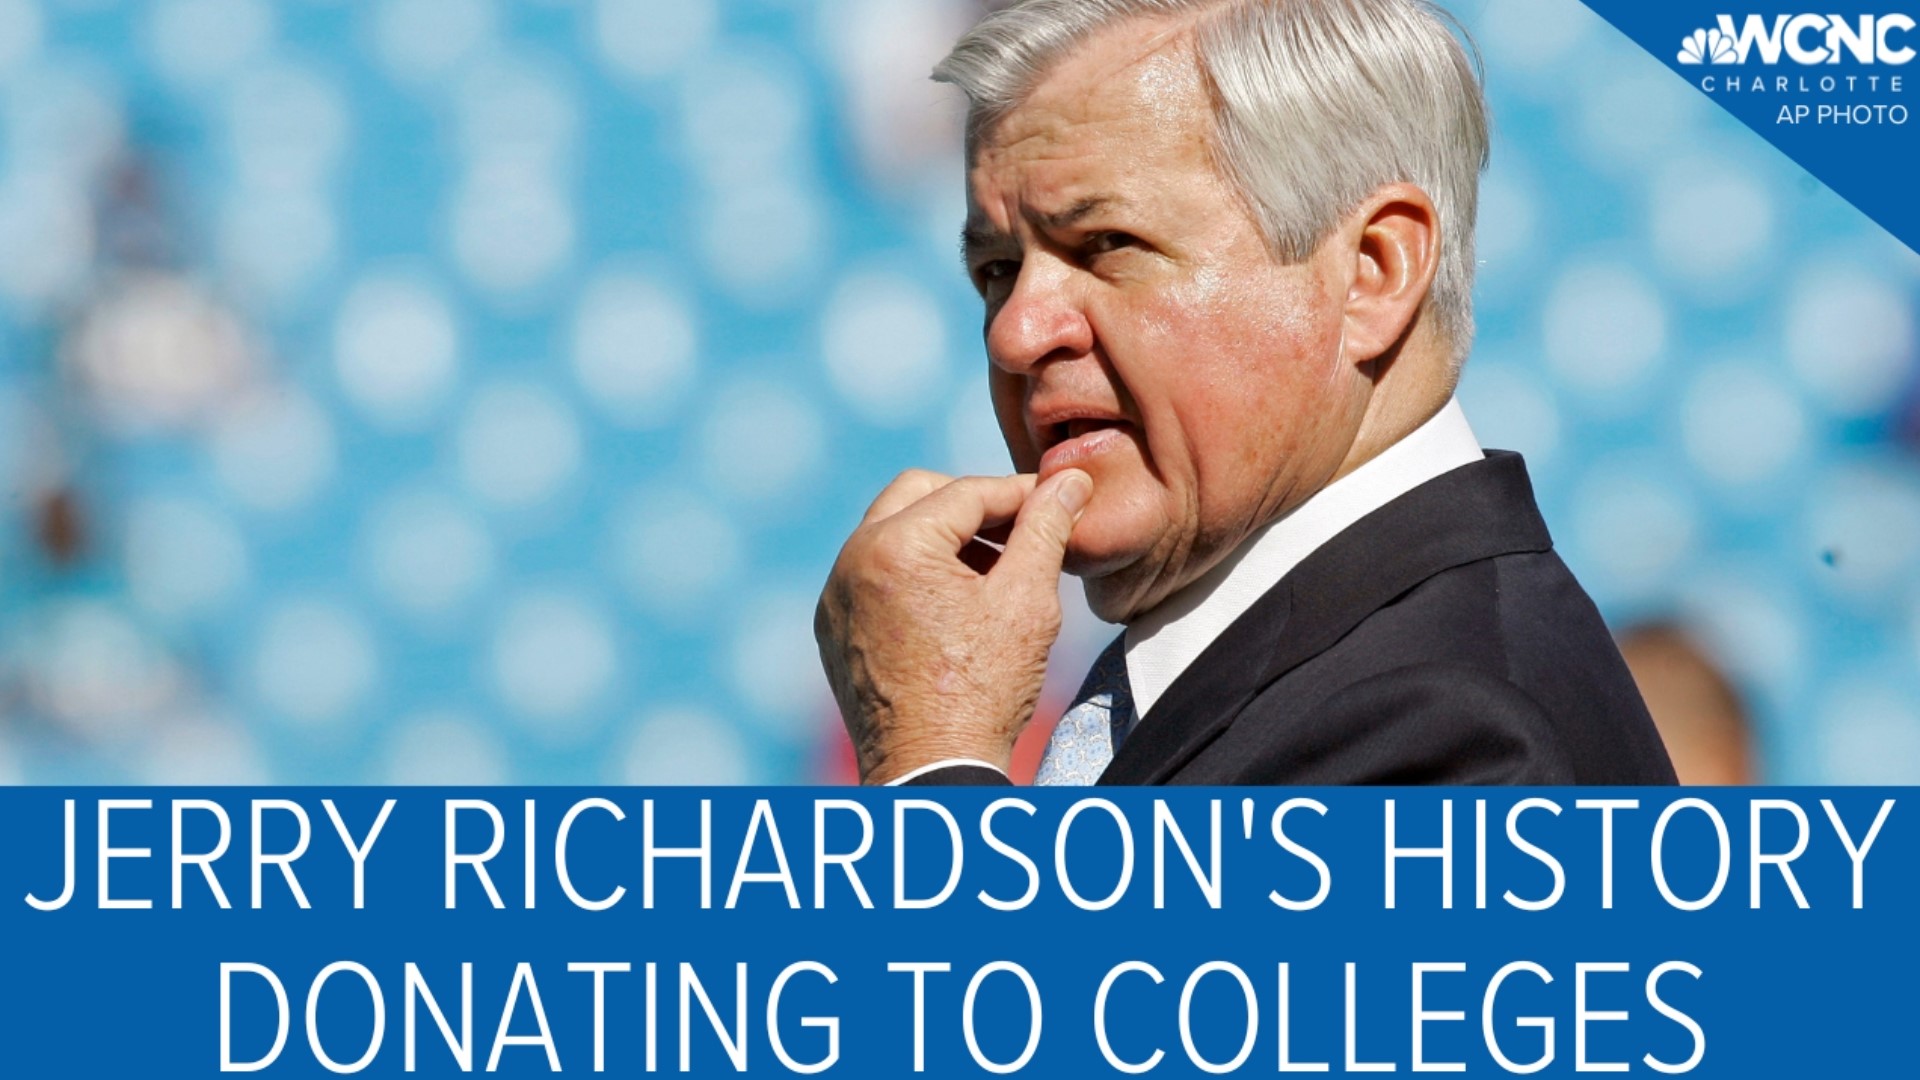 Richardson was a prominent businessman even before owning the Carolina Panthers, and was known for donating to higher education throughout his life.